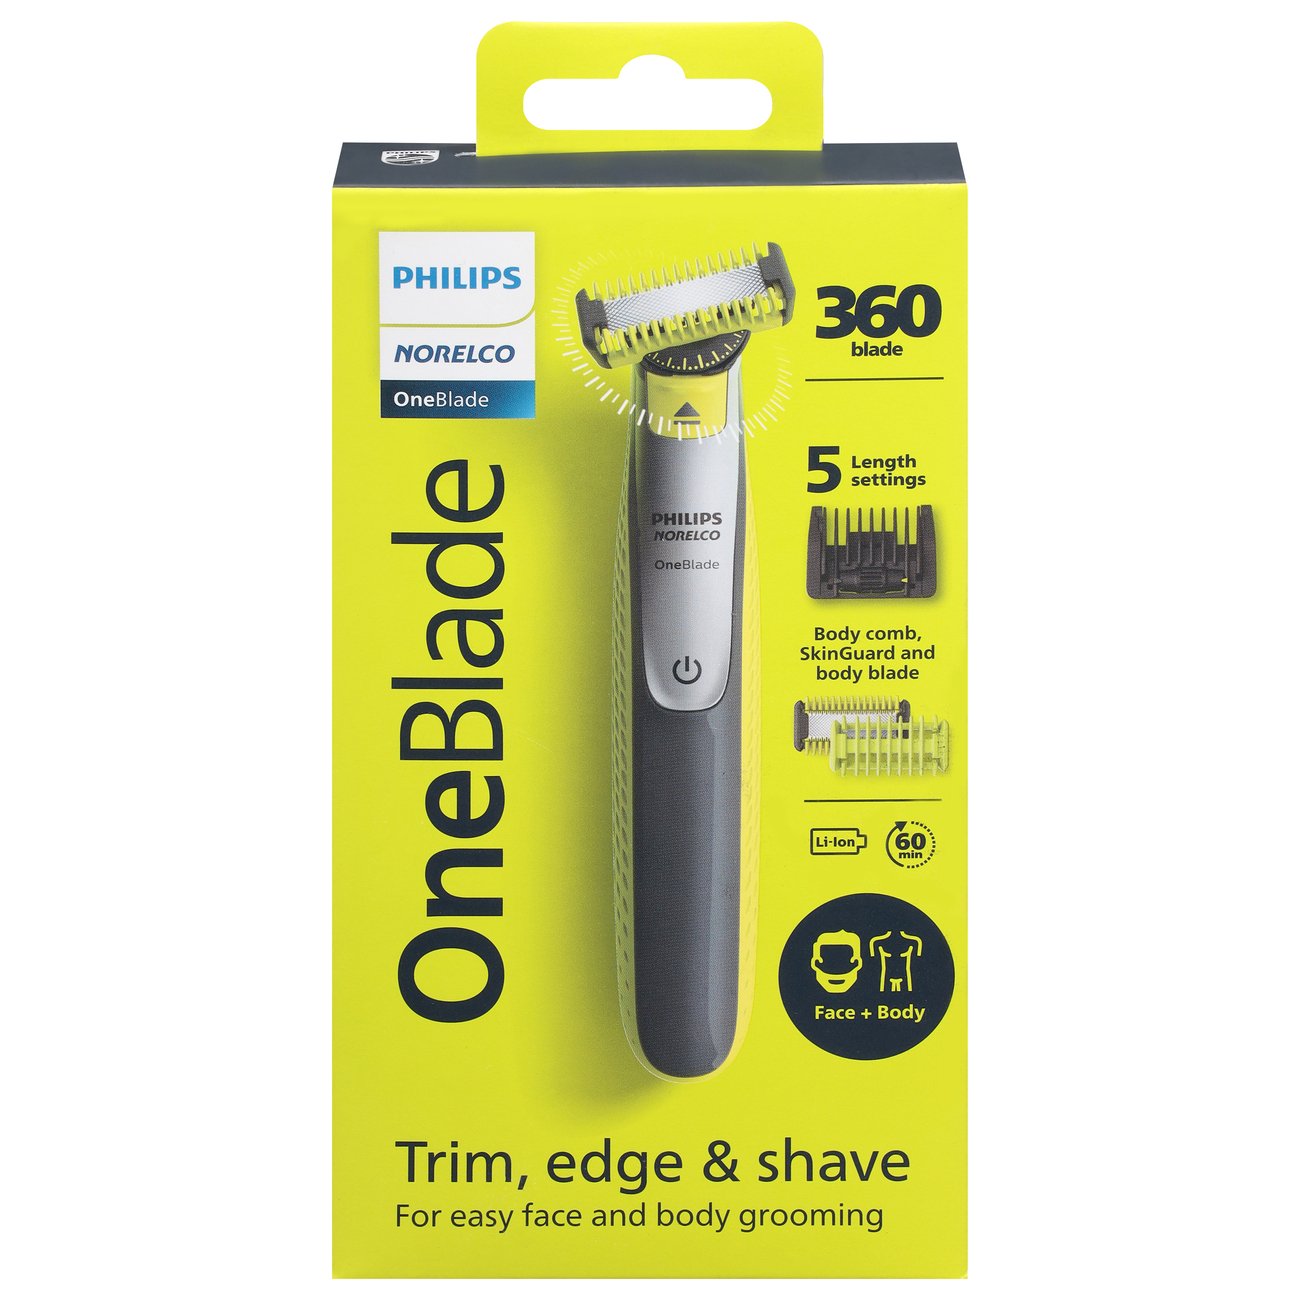 philips oneblade face